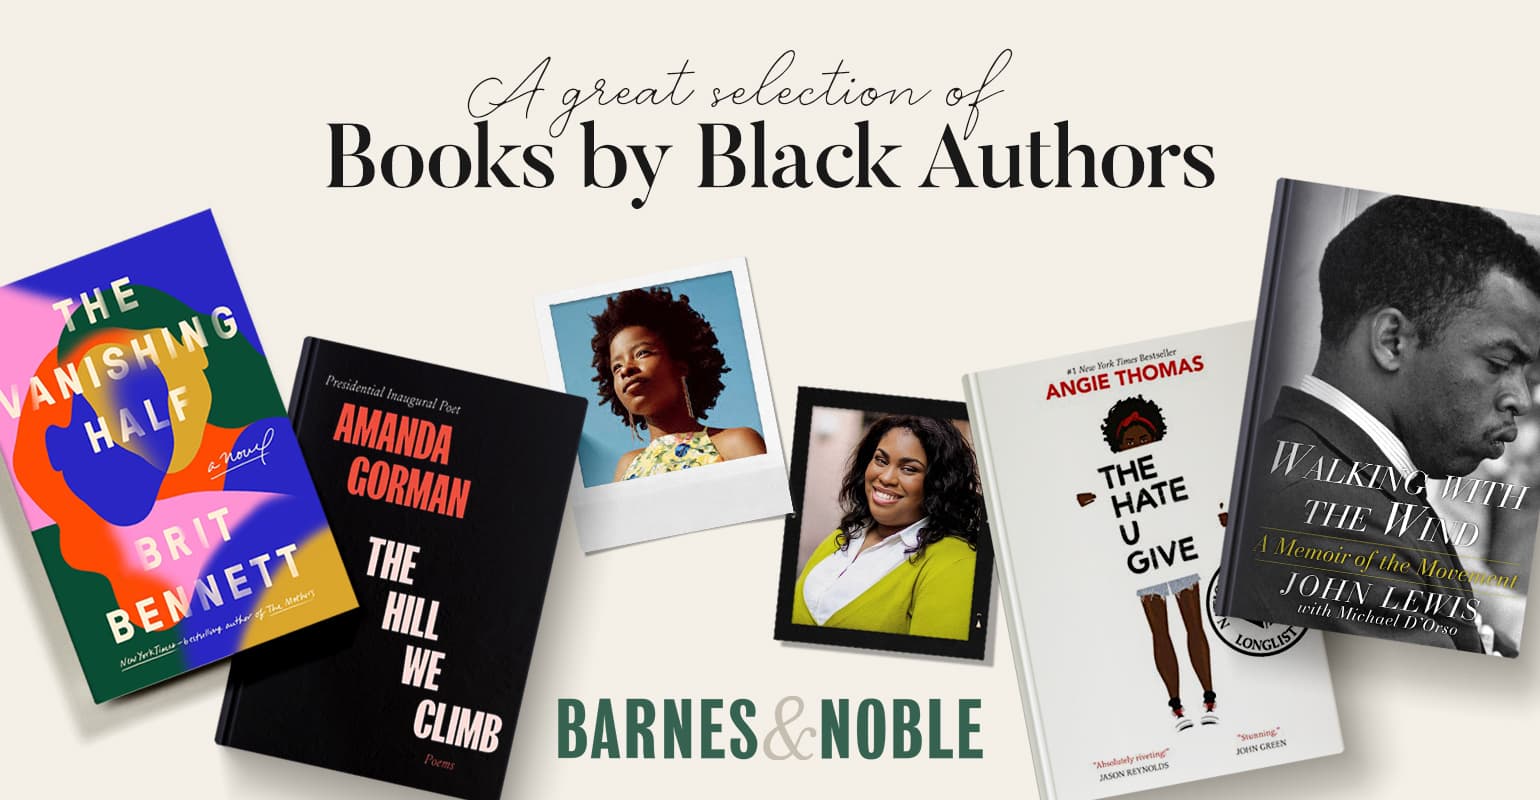 35 Books by Black Authors to Read in 2021